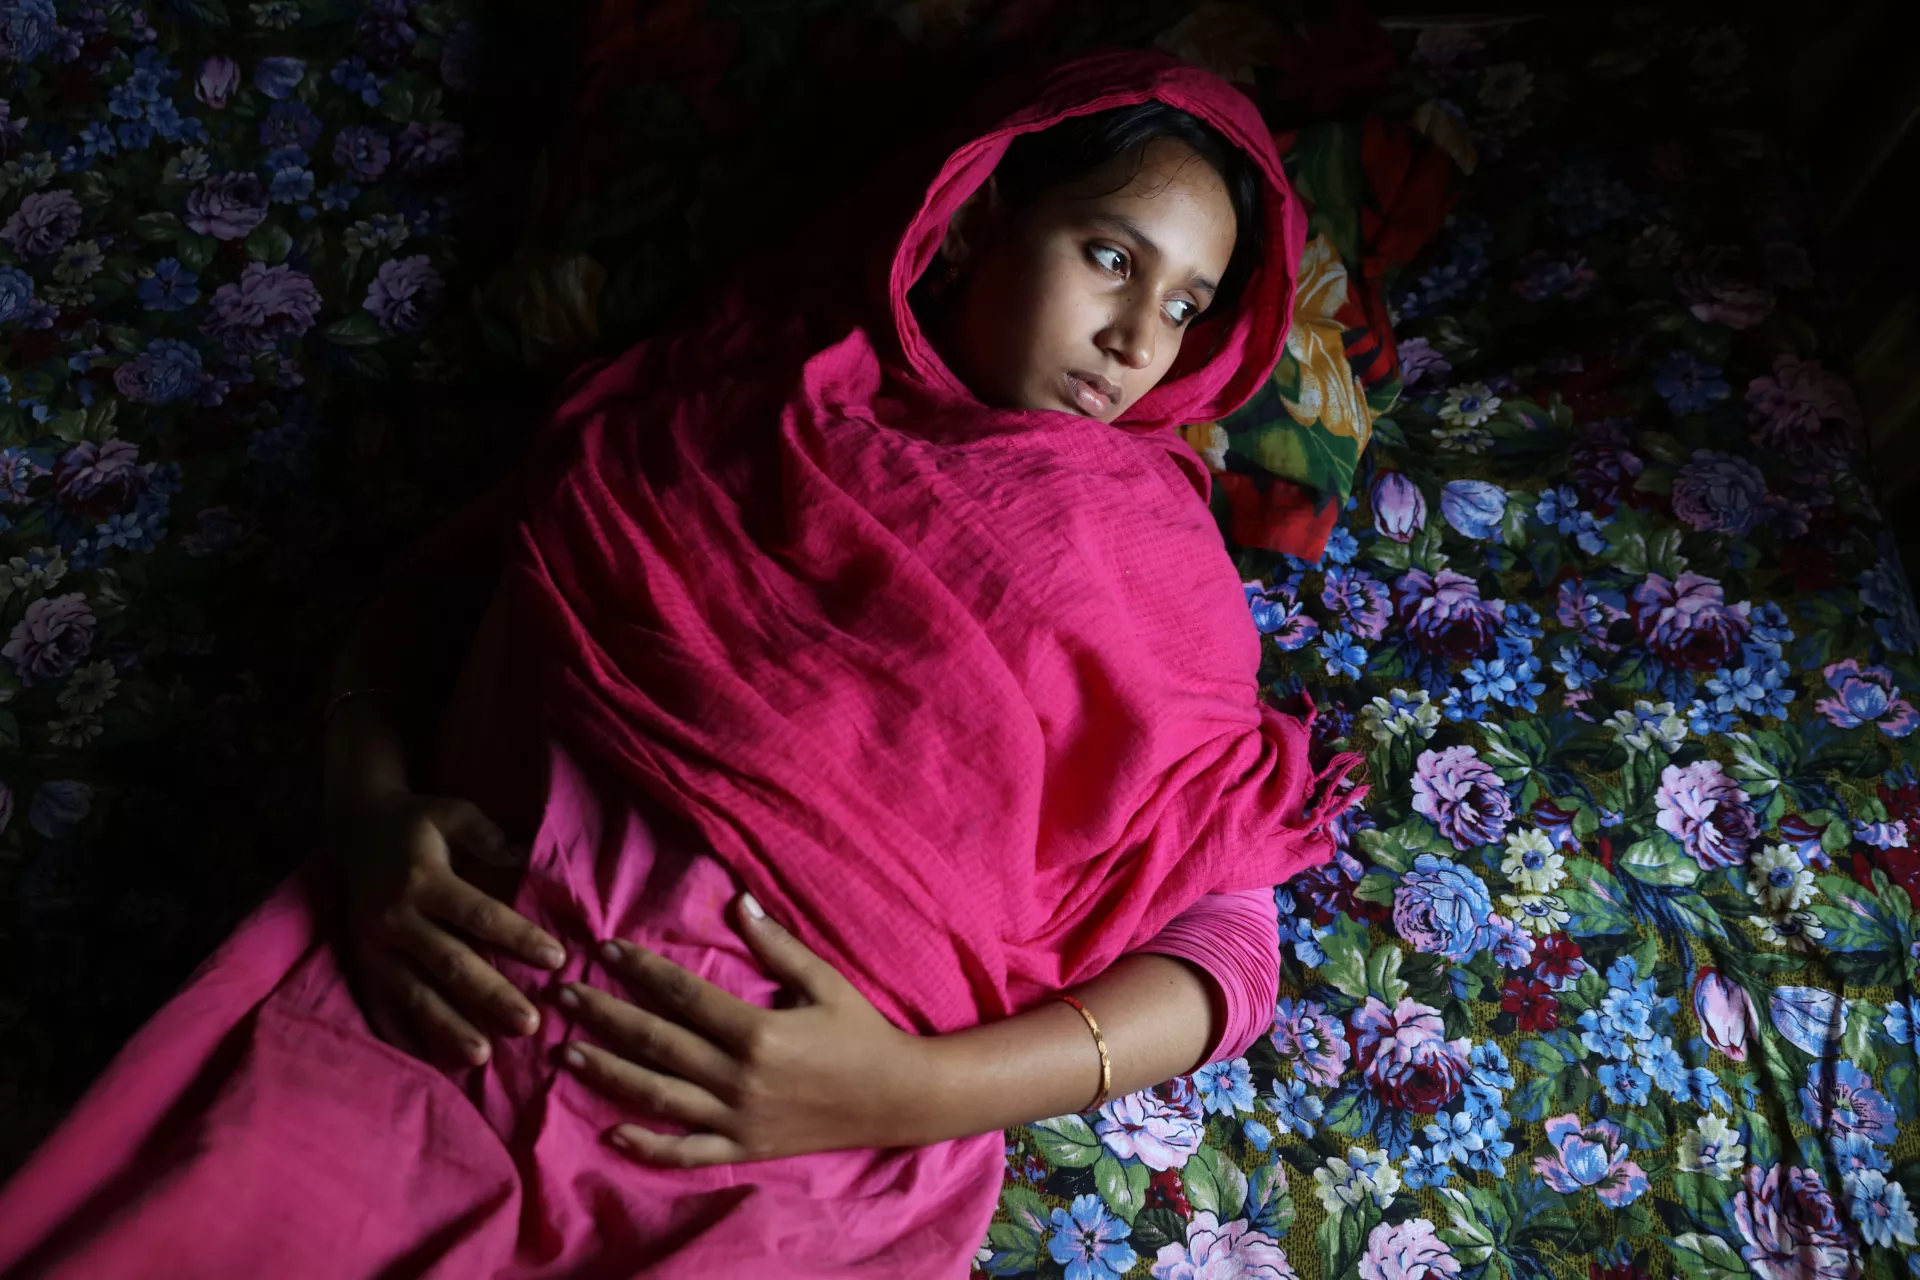 Mosammat Fargana, age 16, is 8 months pregnant, and struggles with health issues